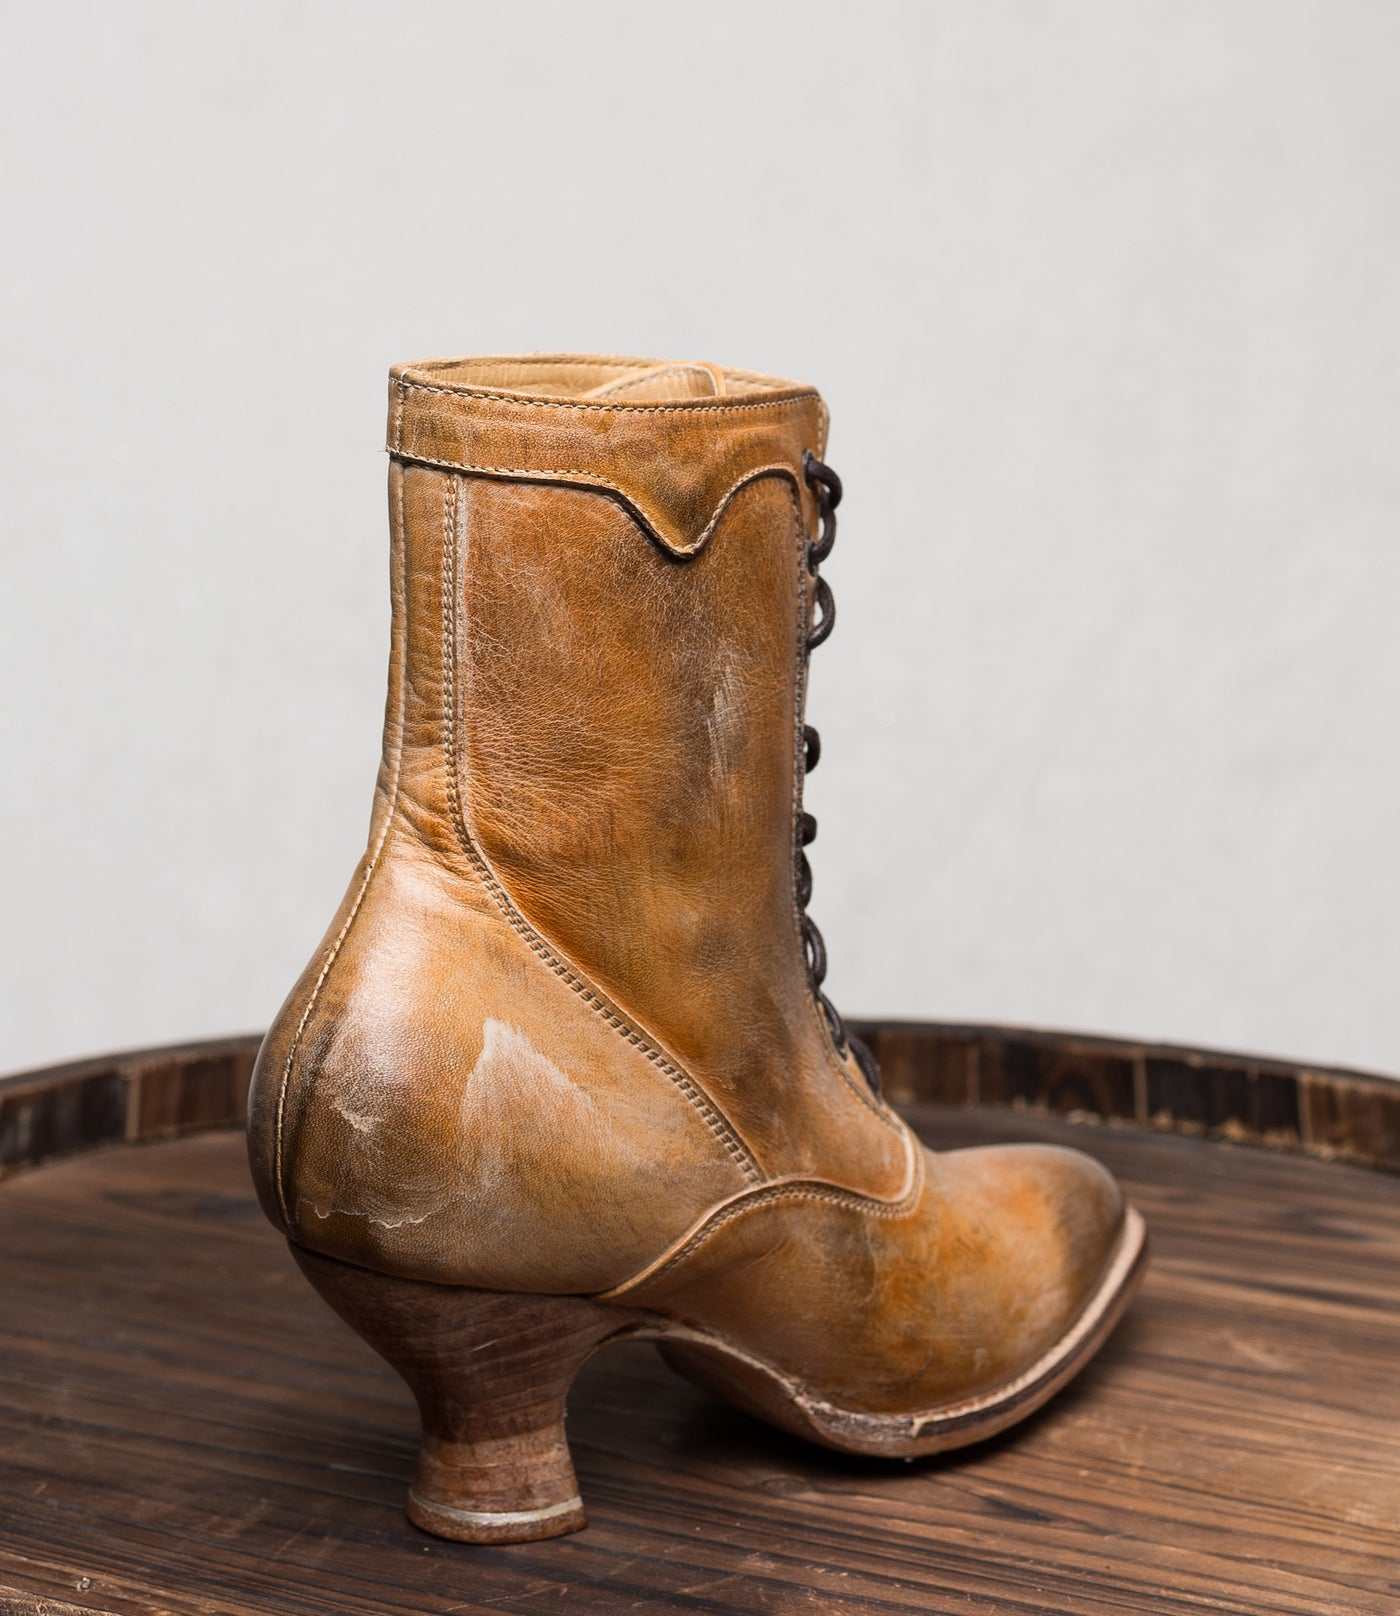 Victorian Style Leather Ankle Boots in Tan Rustic